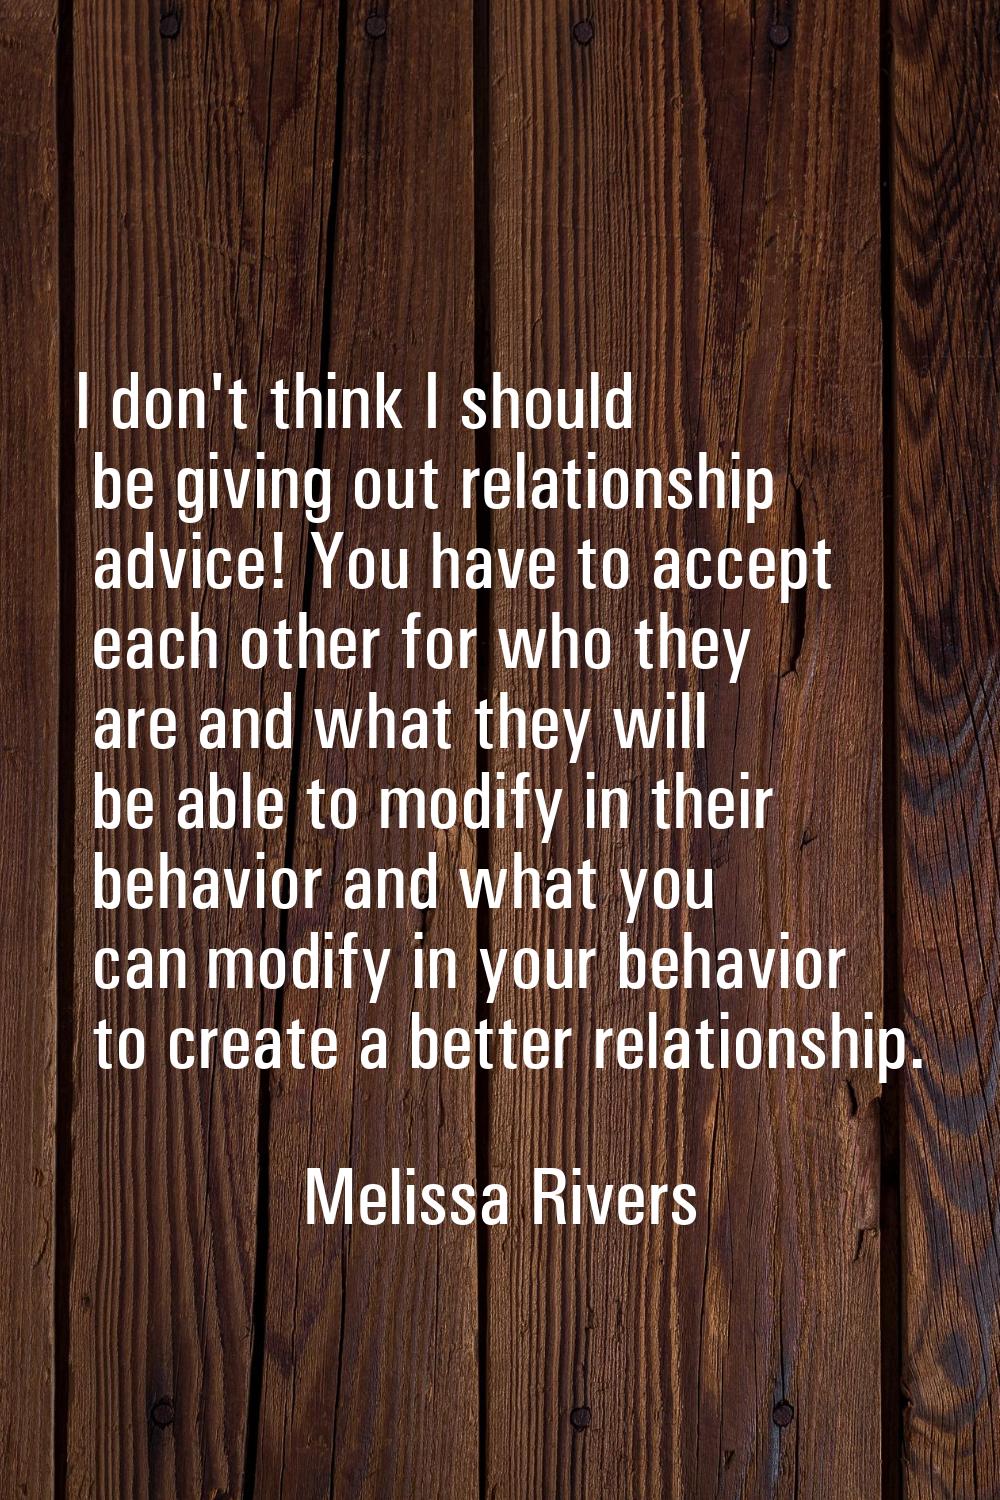 I don't think I should be giving out relationship advice! You have to accept each other for who the